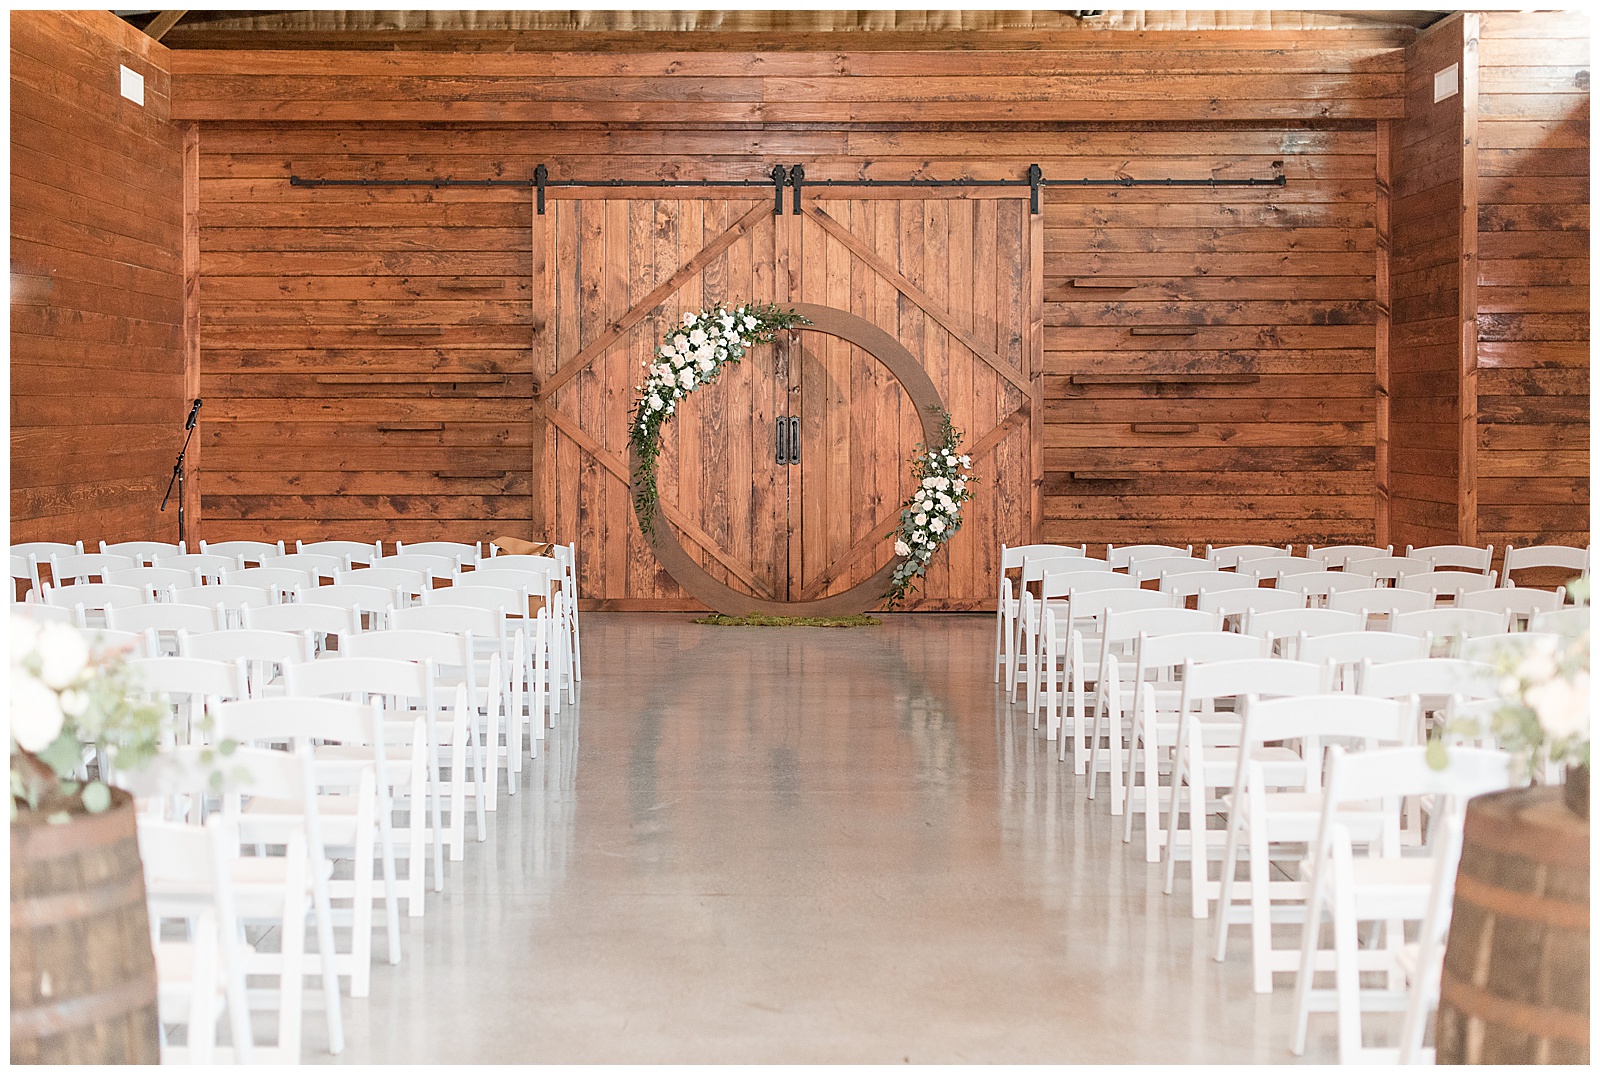 Ceremony set up in Hay Barn at the Barn at Silverstone